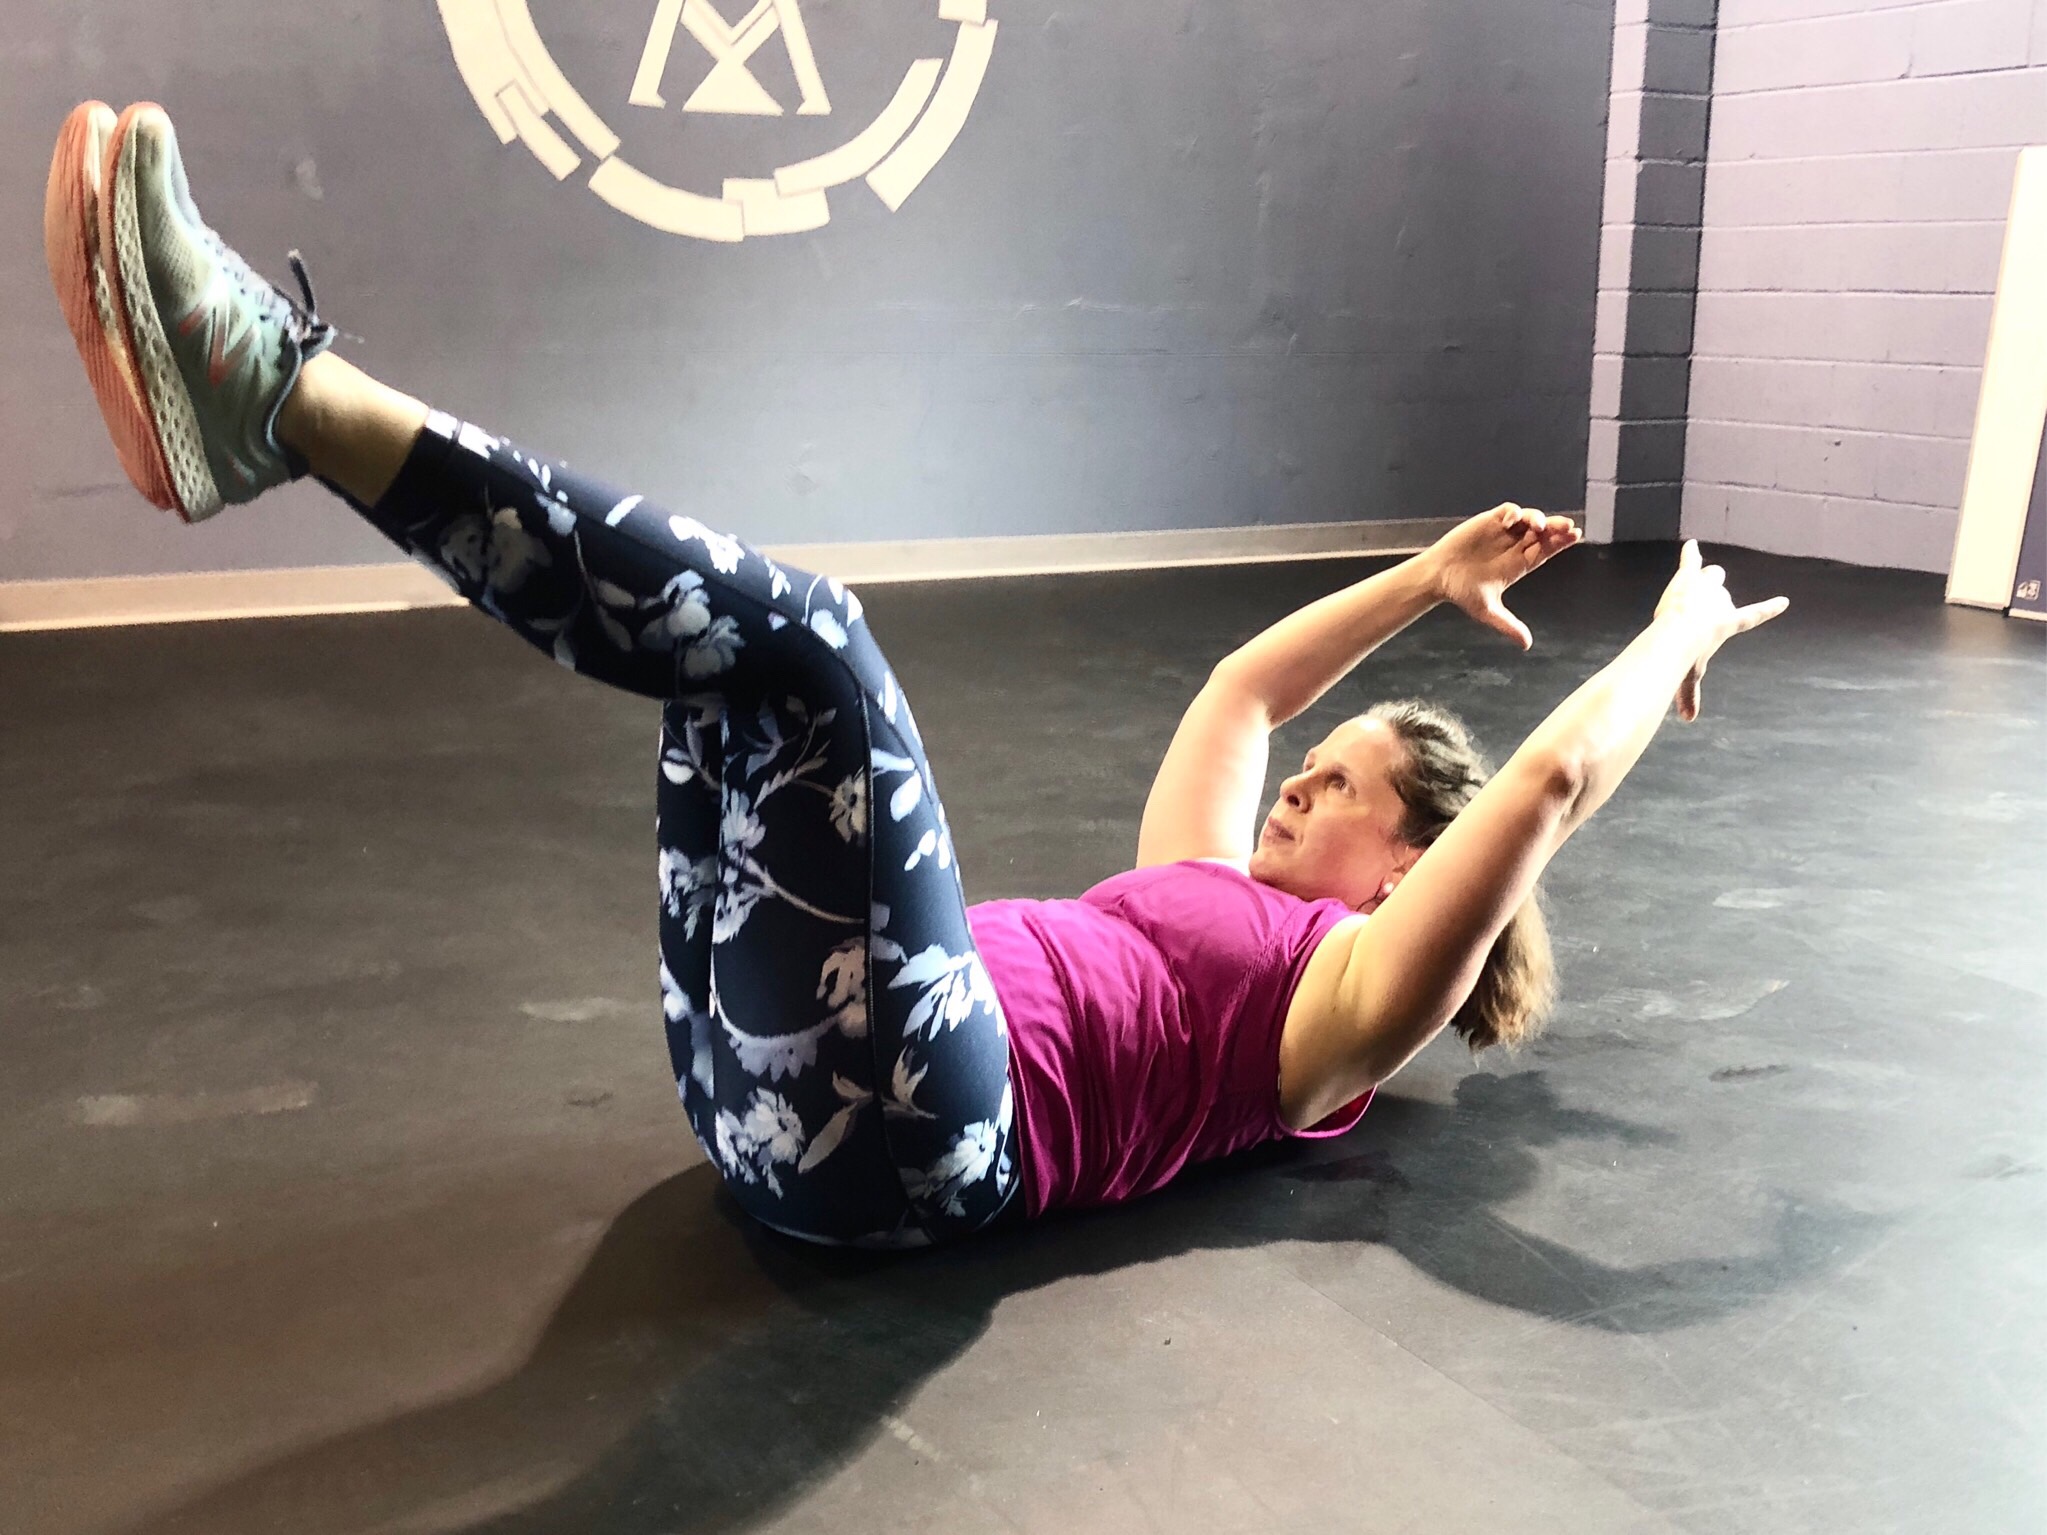 kettlebell workout, workout, crossfit, wellness coach, personal training, group workout, community workout, winston salem, north carolina, boat pose, ab strength, core strength, concentration